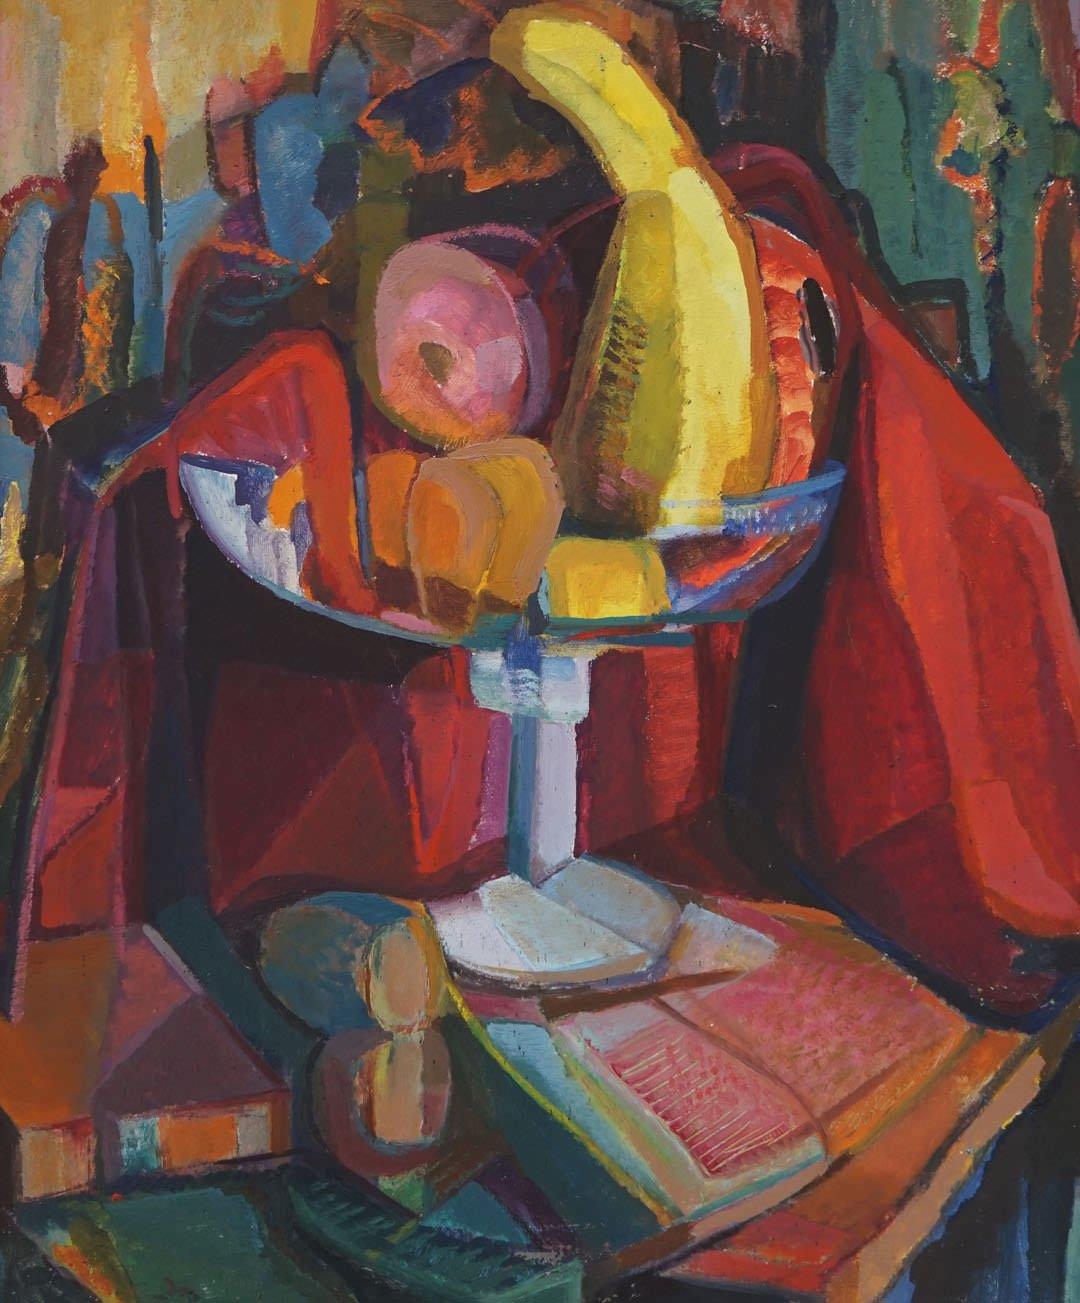 Blue Table Still Life, early 20th century vibrant oil painting, Cleveland School - Painting by Clara Deike